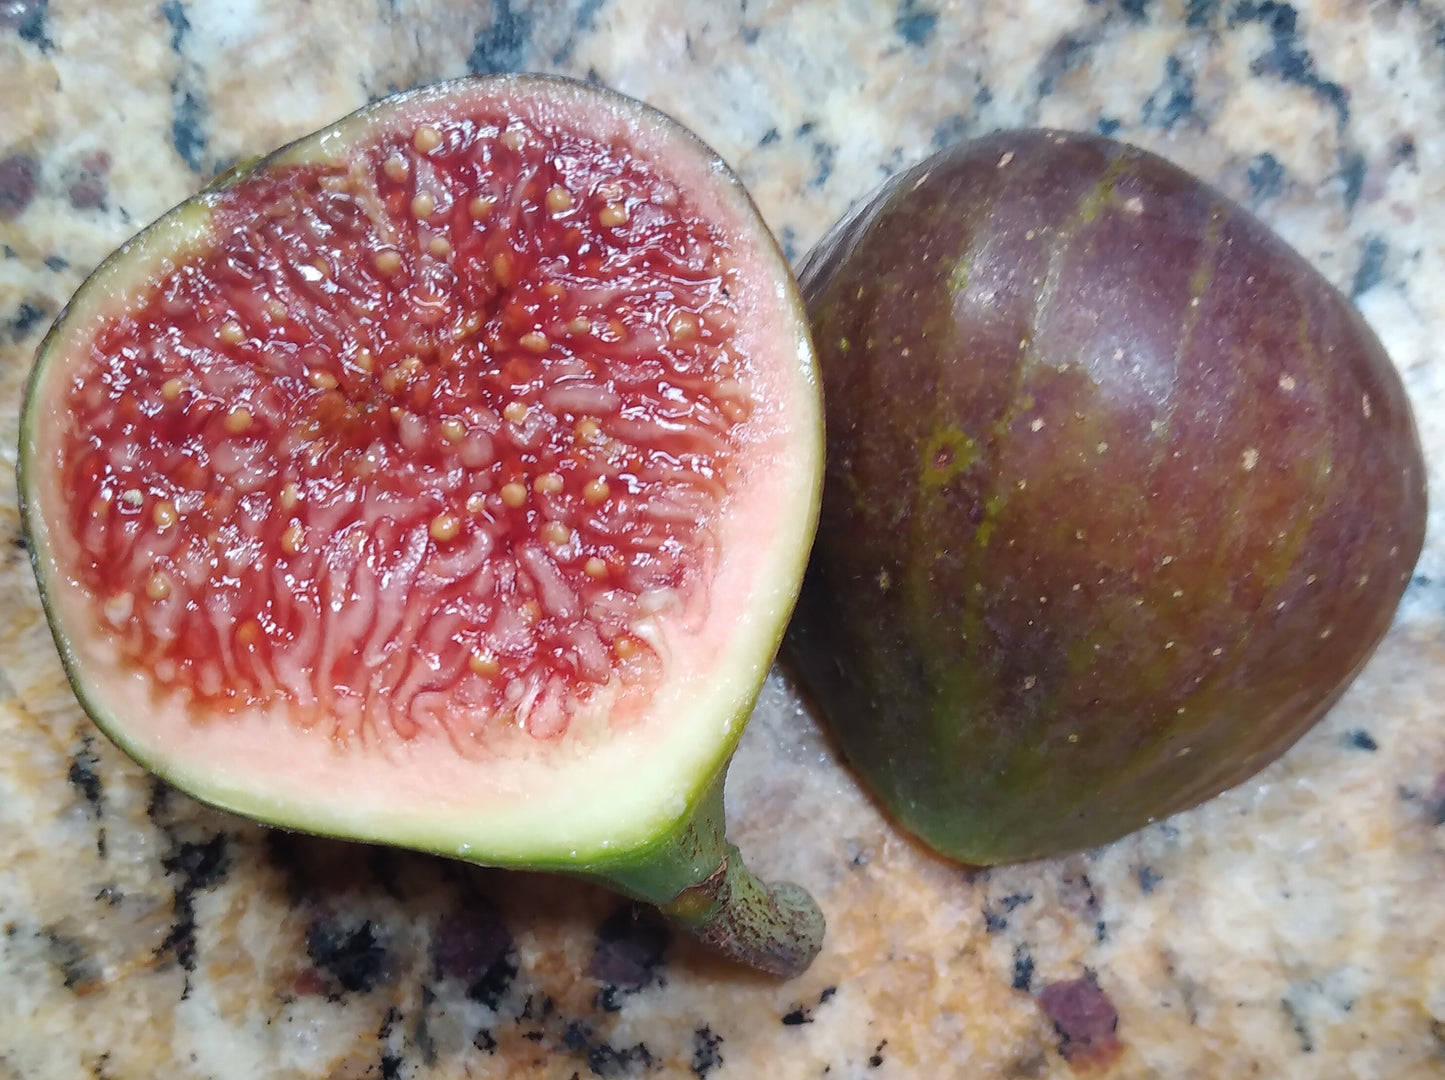 Olympian Fig Tree - 2 Cuttings - Early and Cold Hardy - Tasty Sugar Figs